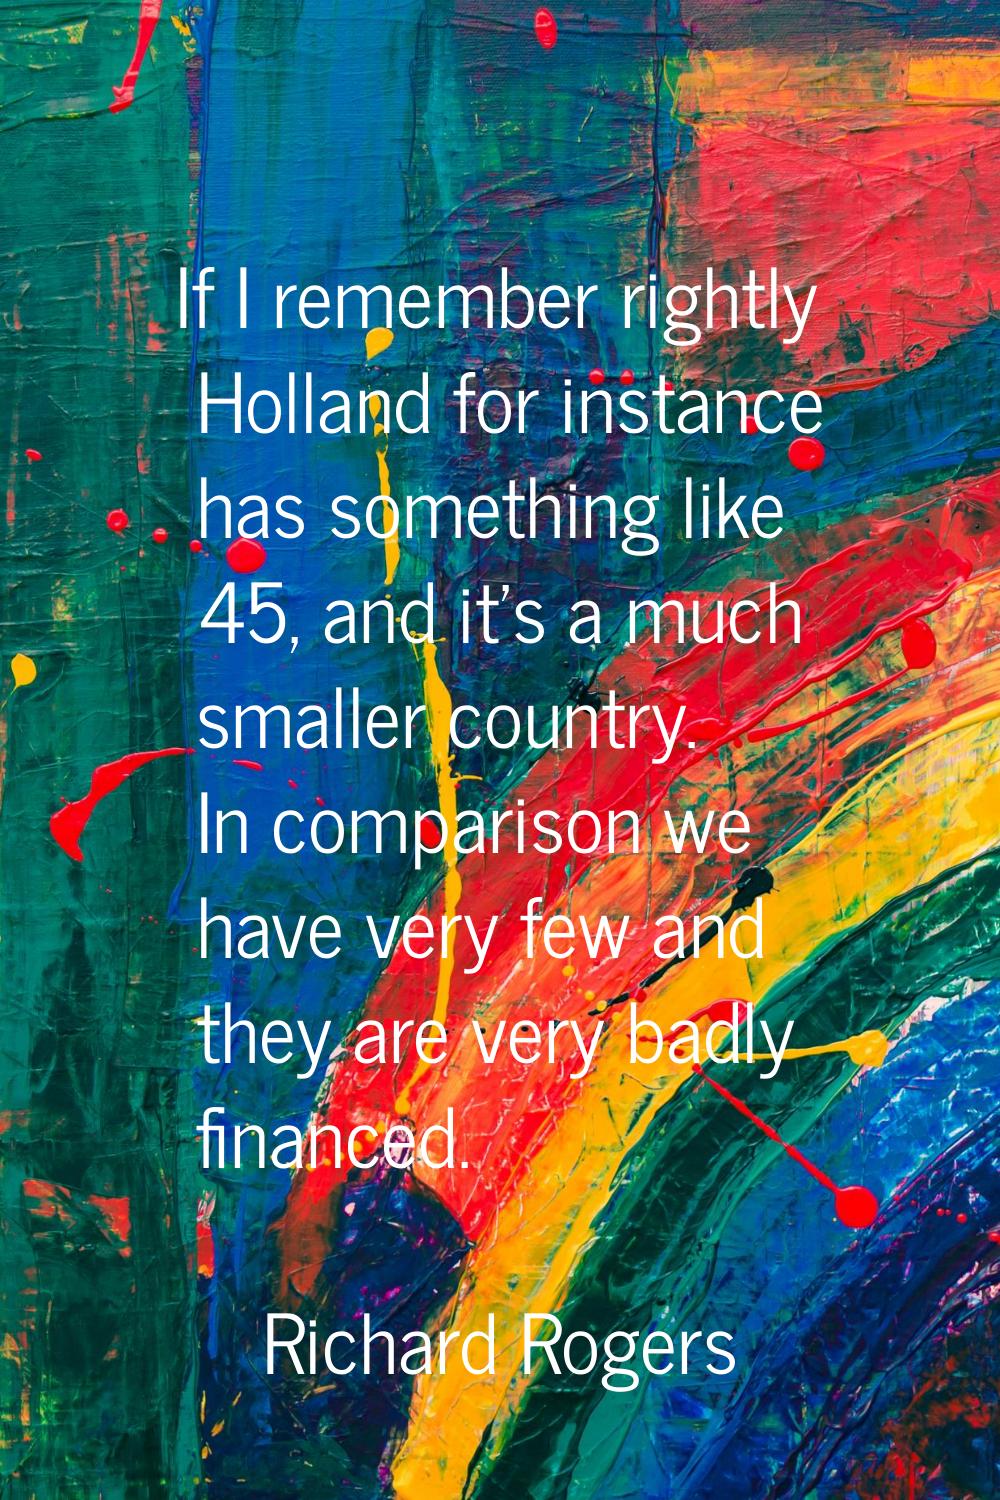 If I remember rightly Holland for instance has something like 45, and it's a much smaller country. 